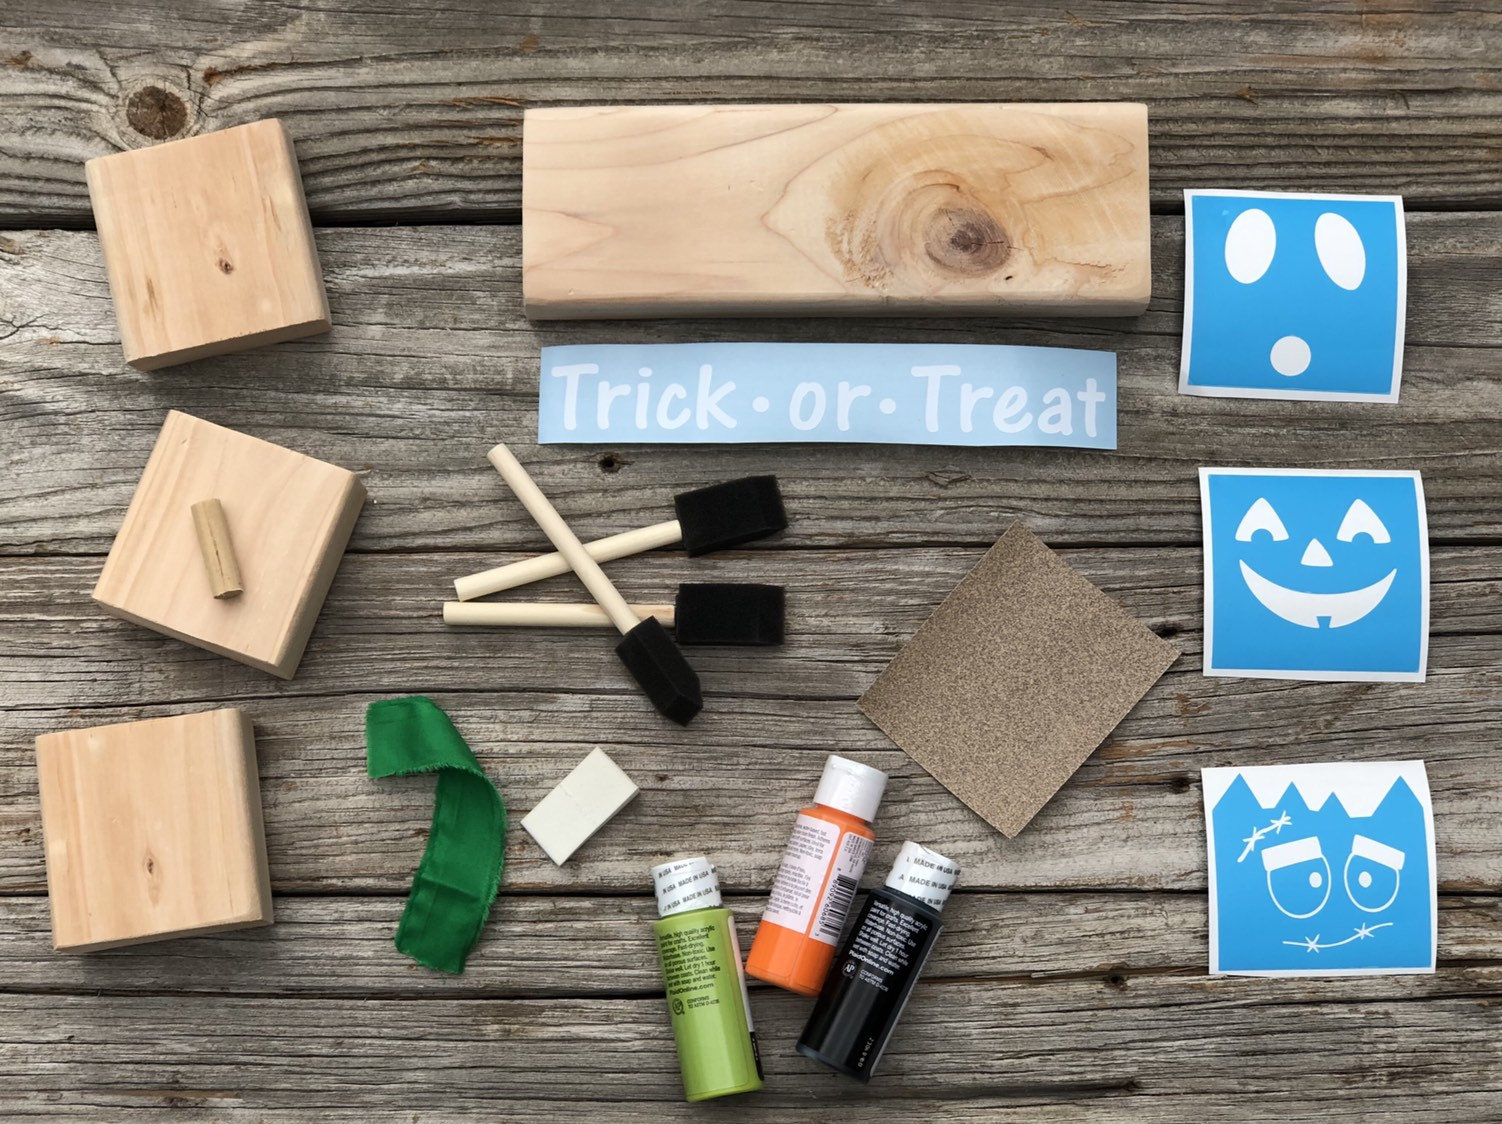 DIY Halloween craft kit for adults. How to make 2x4 halloween crafts